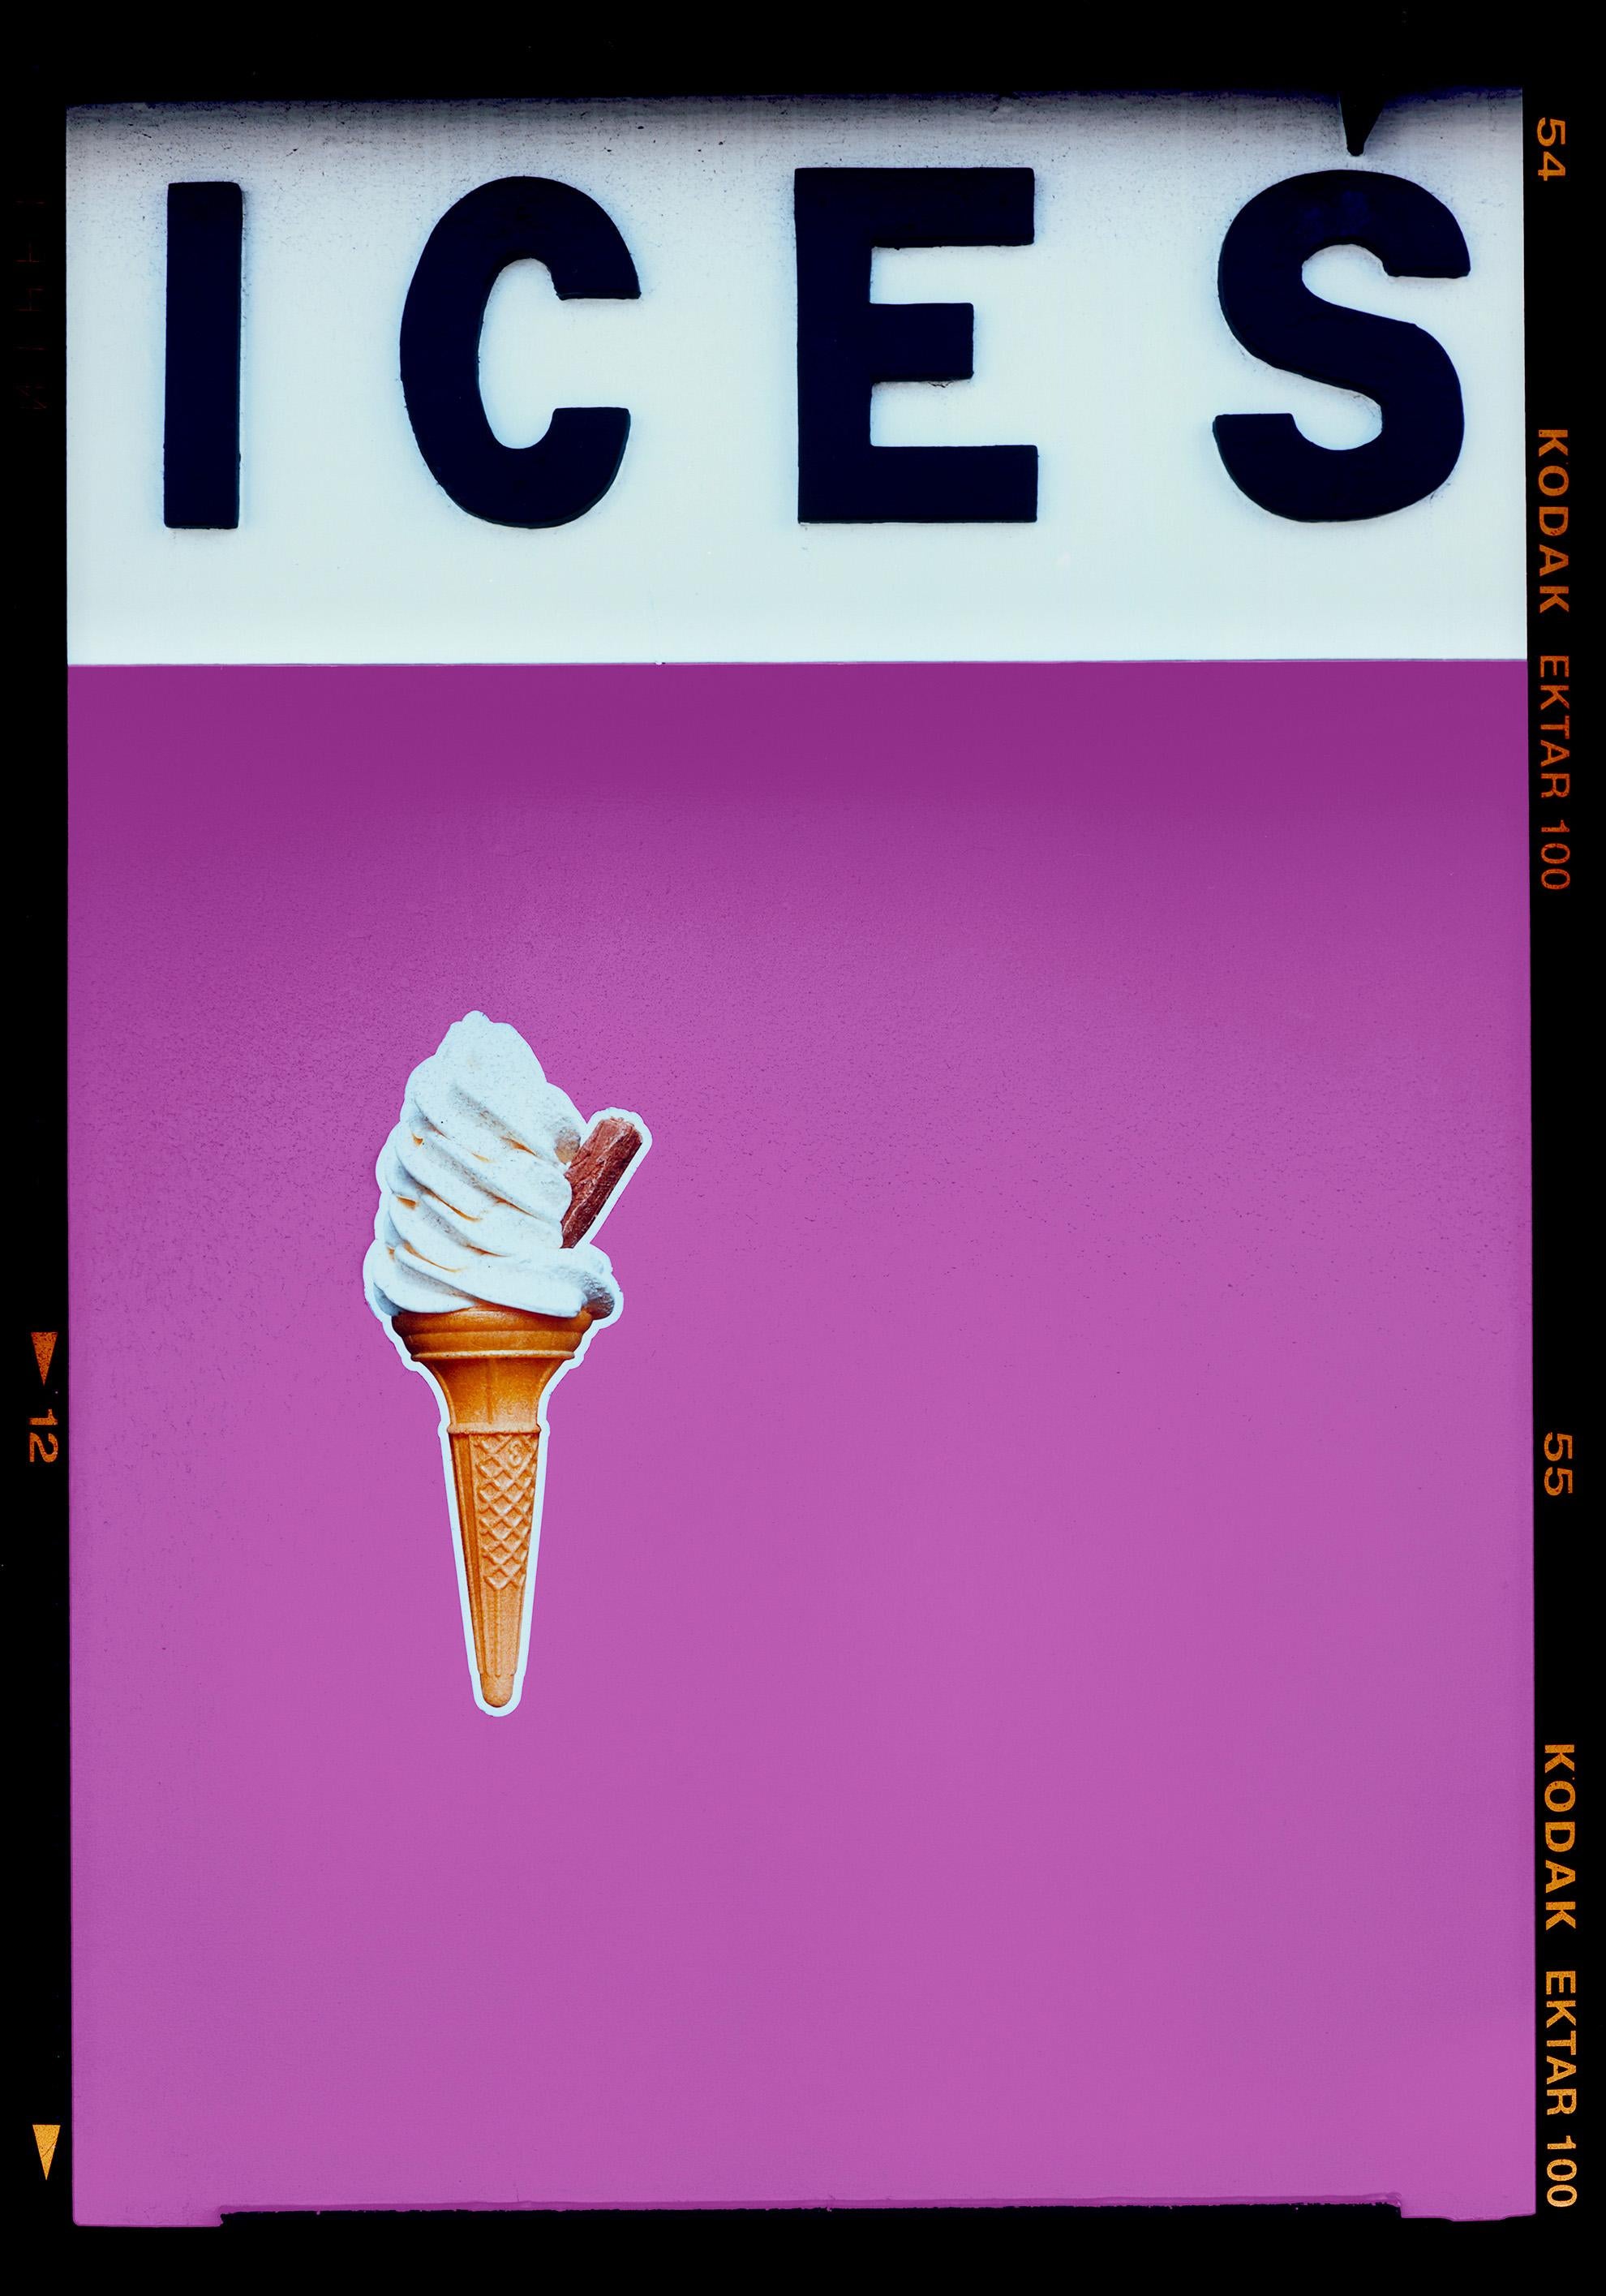 ICES (Plum), Bexhill-on-Sea - British seaside color photography